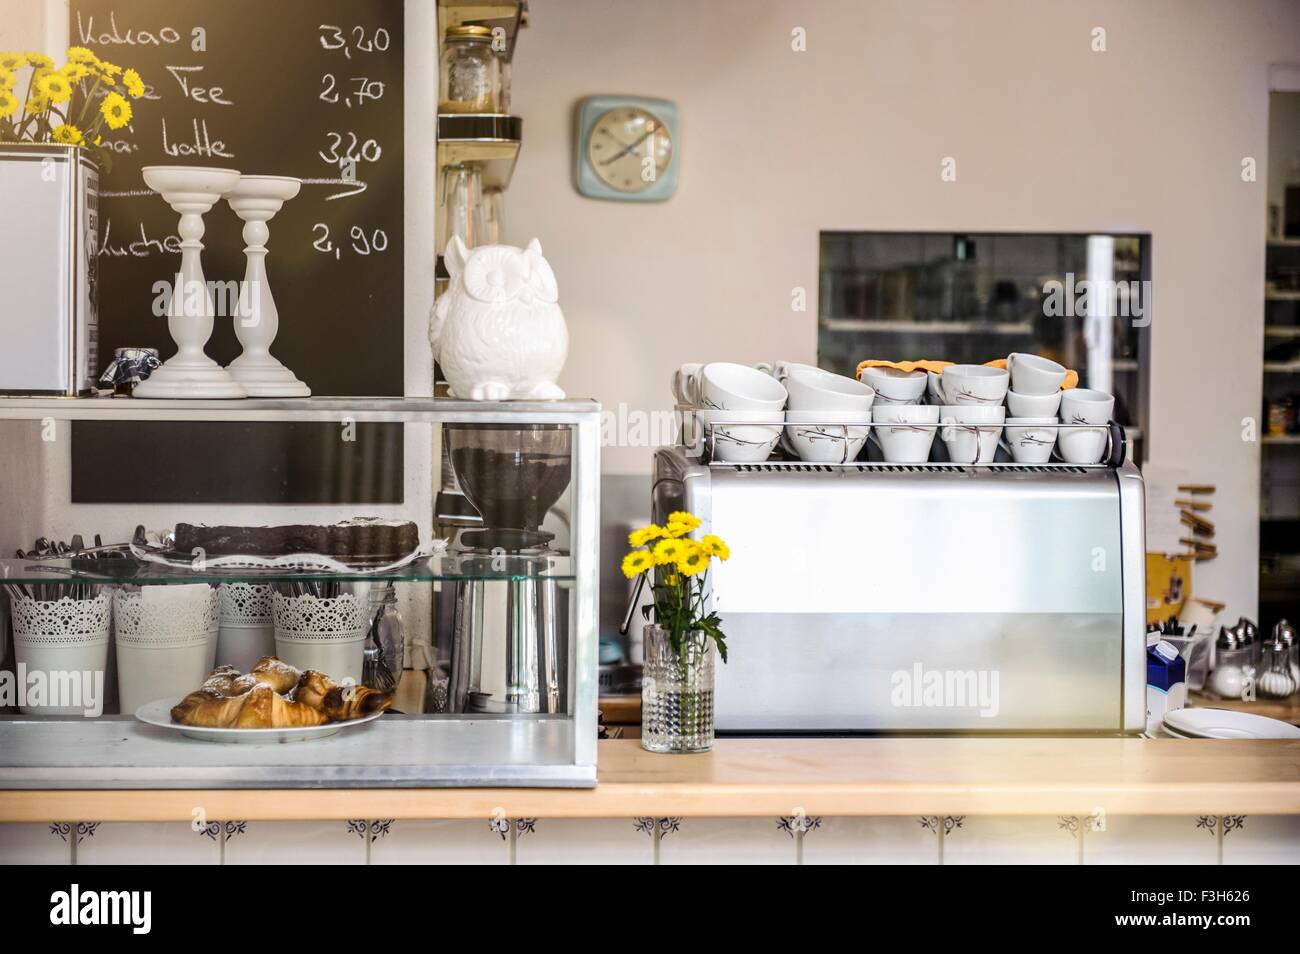 Cafe counter with coffee machine and food display cabinet Stock Photo